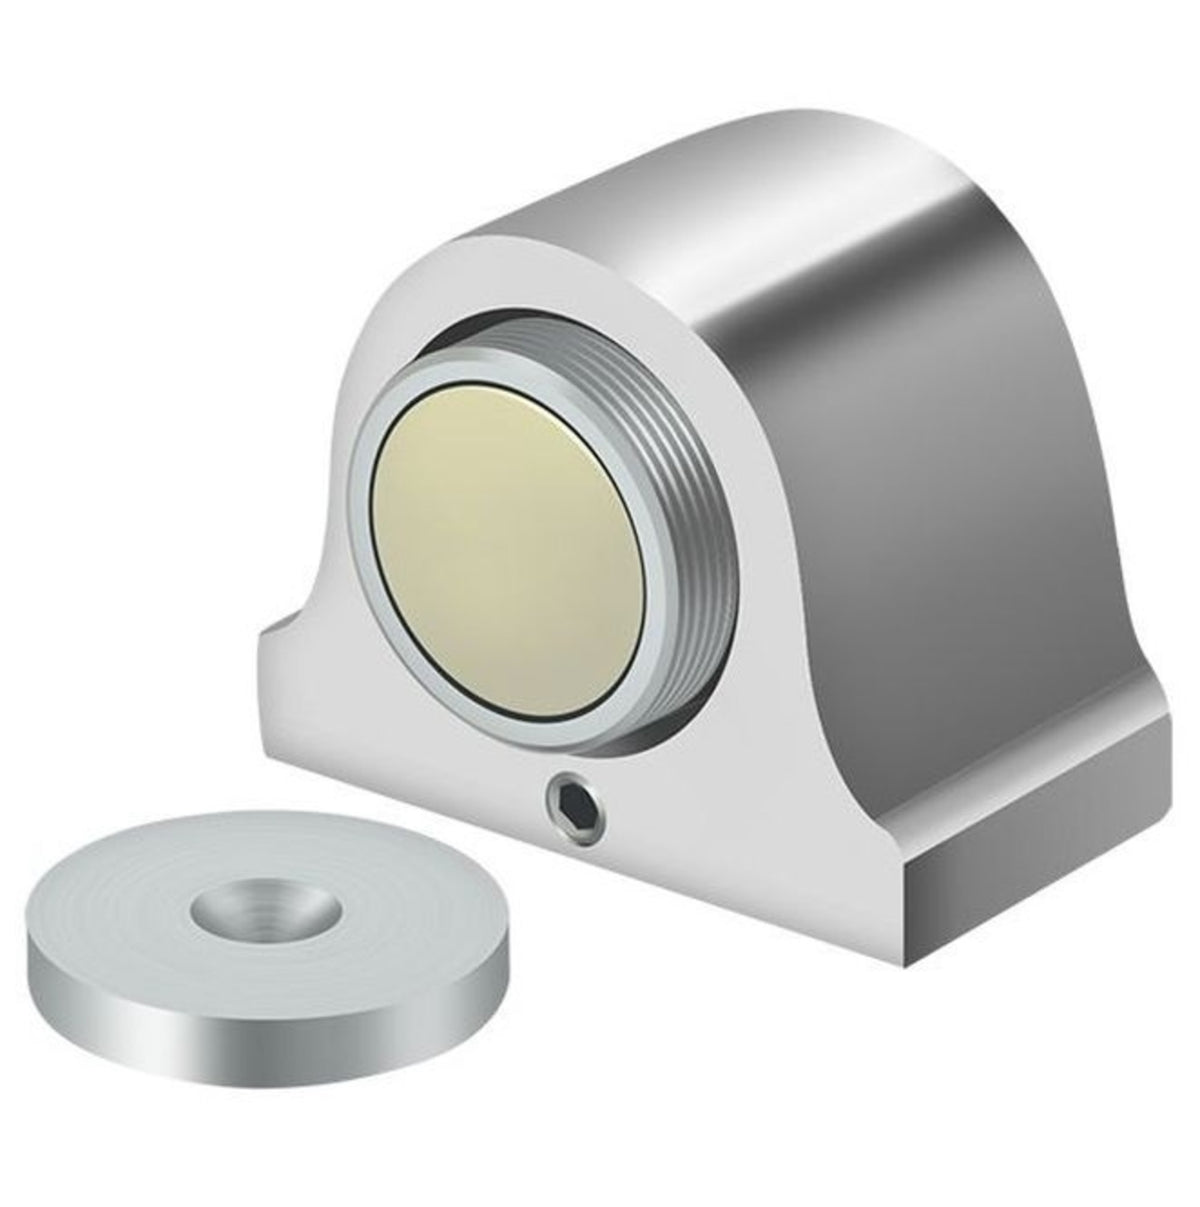 Deltana DSM125U32 Magnetic Dome Stop, Bright Stainless Steel